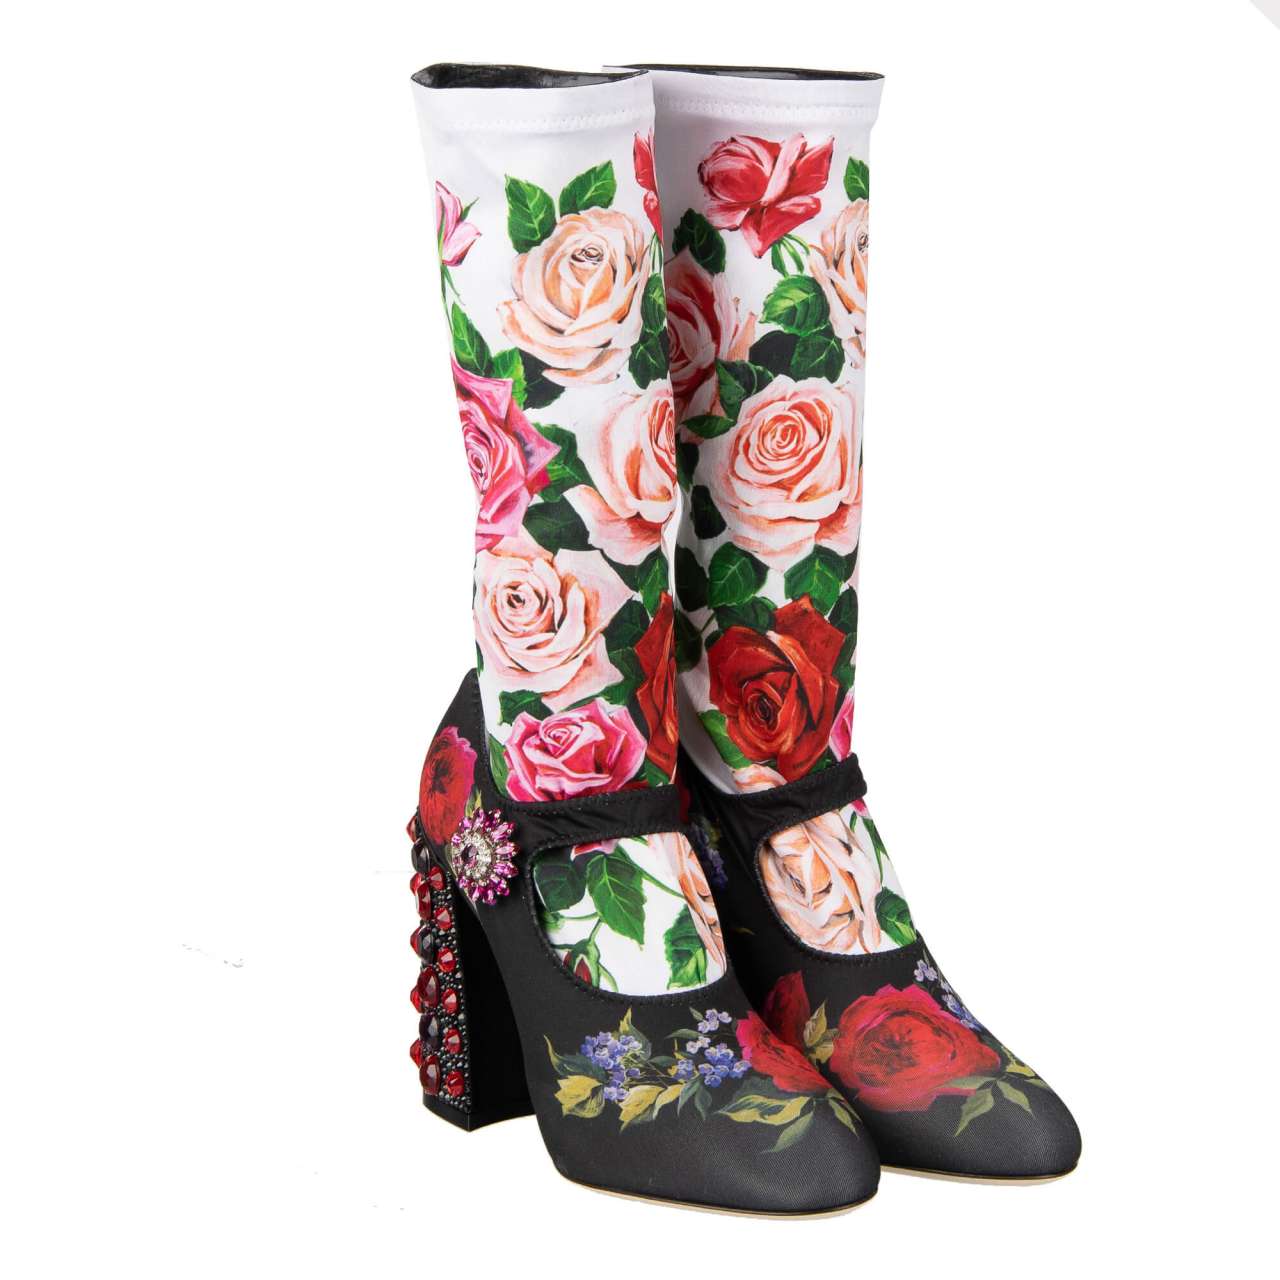 D&G Roses Printed Elastic Socks Pumps VALLY with Crystals Heel Black White 38 For Sale